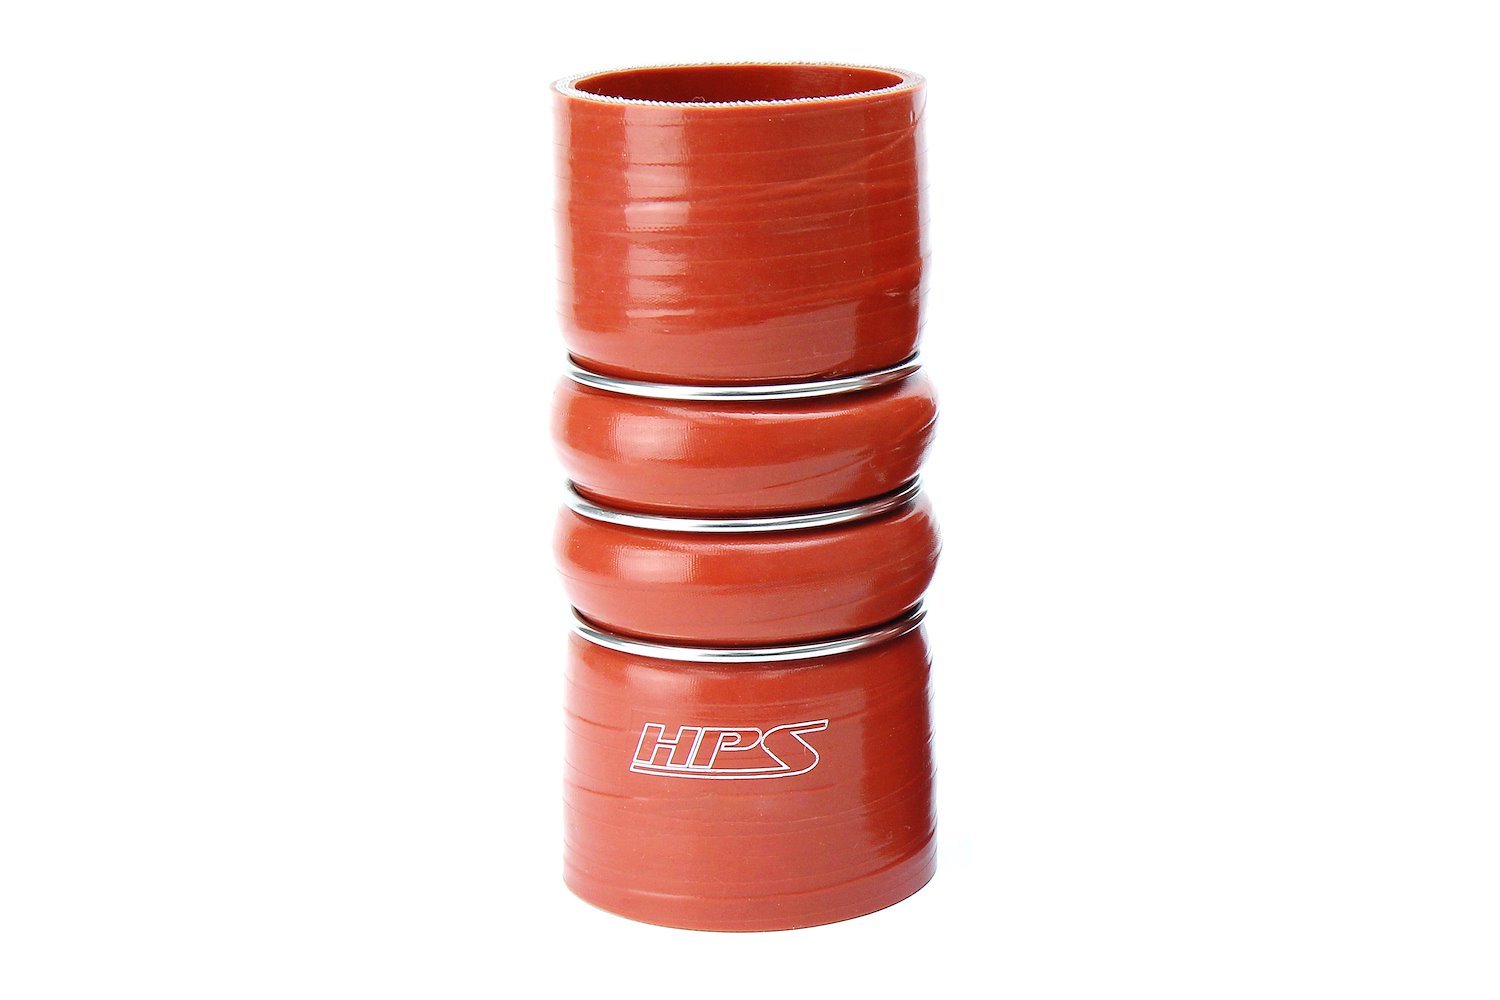 CAC-300-HOT Silicone CAC Hose, Silicone CAC Hump Hose Hot, High-Temp 4-Ply Aramid Reinforced, 3 in. ID, 6 in. Long